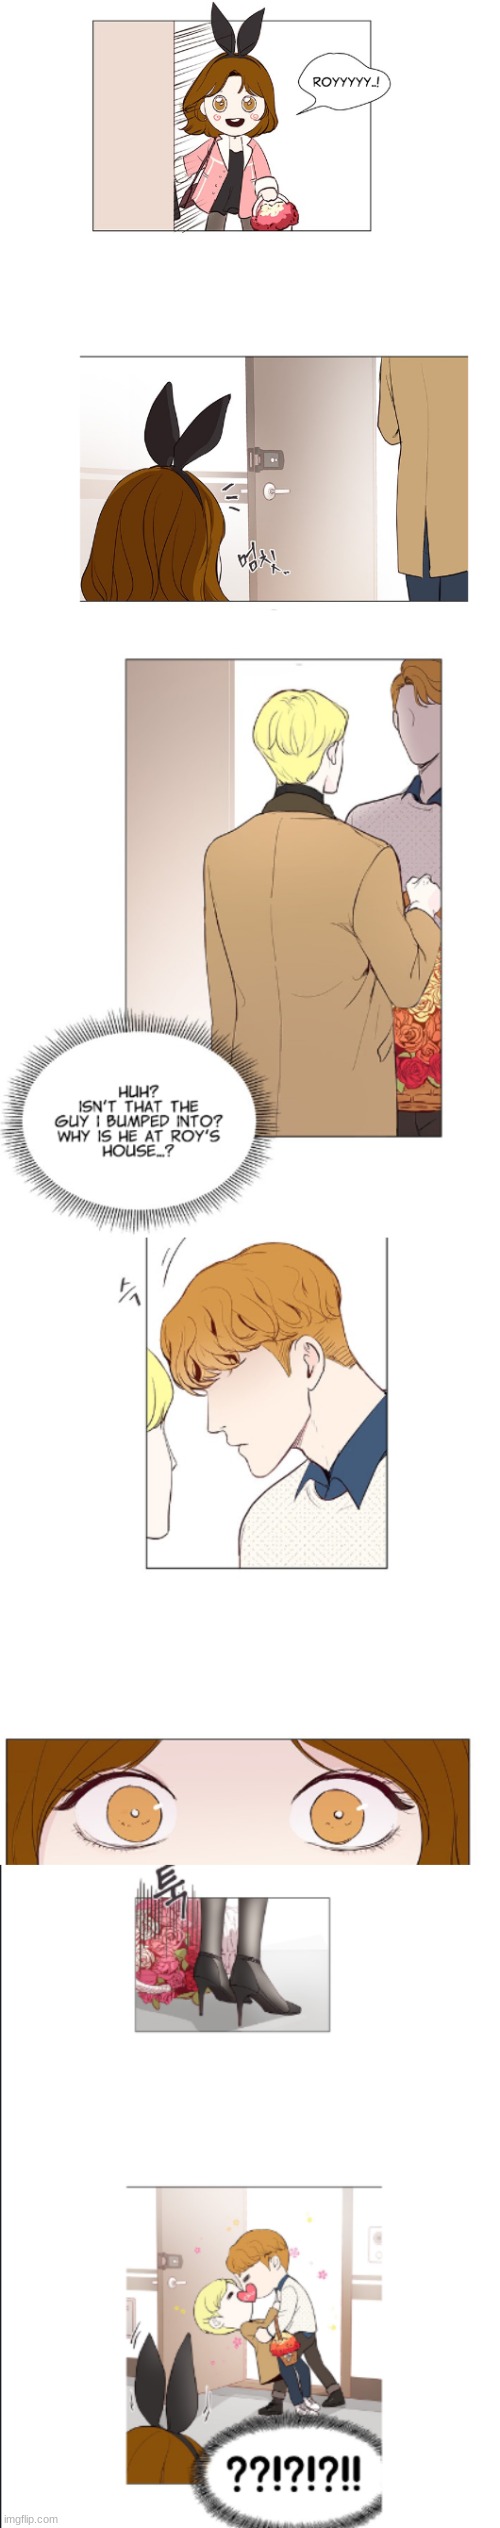 this is a rather surprising way to find out your bf is gay | image tagged in anime,funny,manga,manhwa | made w/ Imgflip meme maker